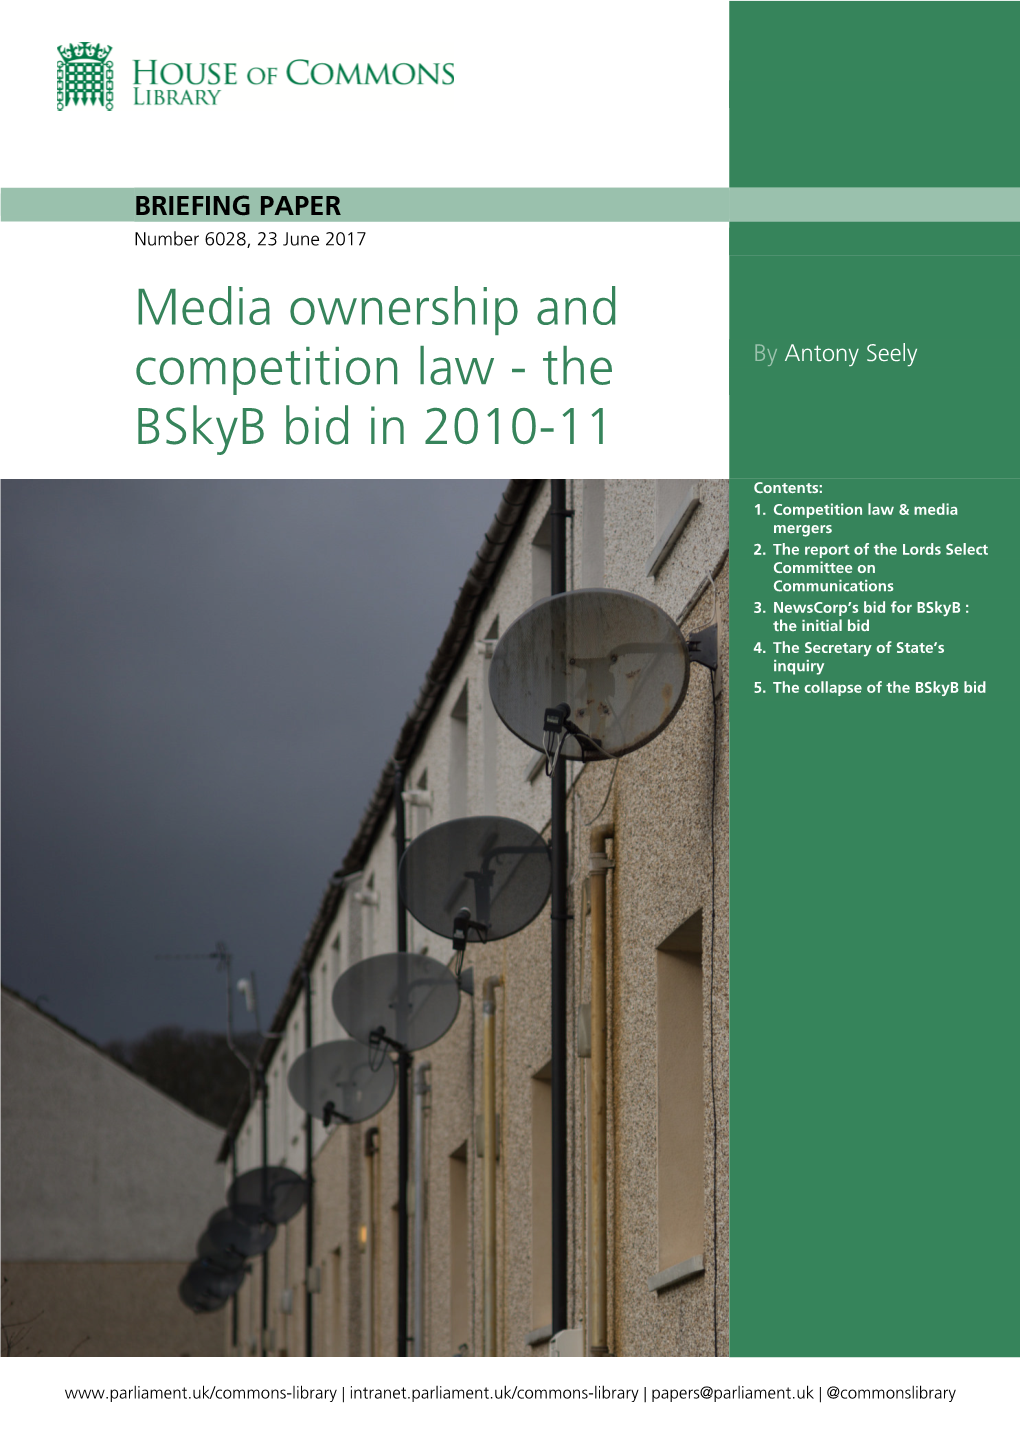 Media Ownership and Competition Law - the Bskyb Bid in 2010-11